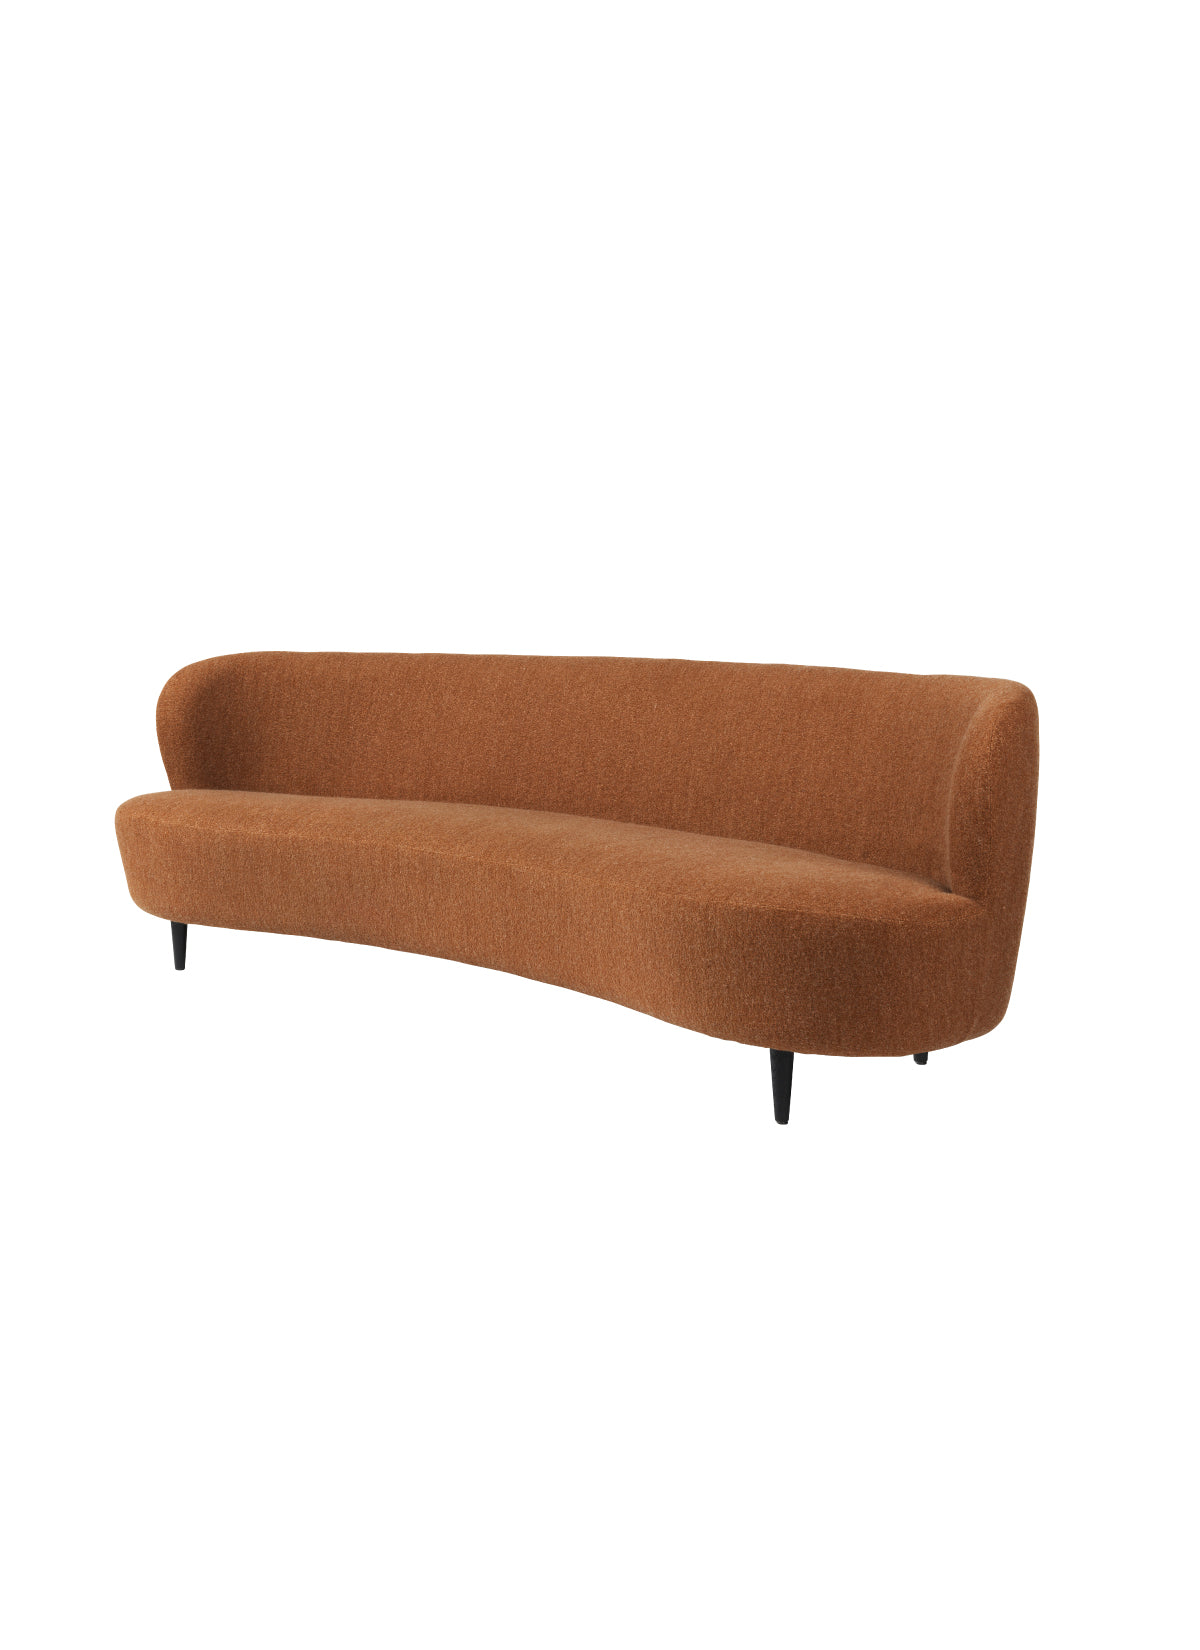 Stay Sofa - Oval - Wooden Legs by Gubi